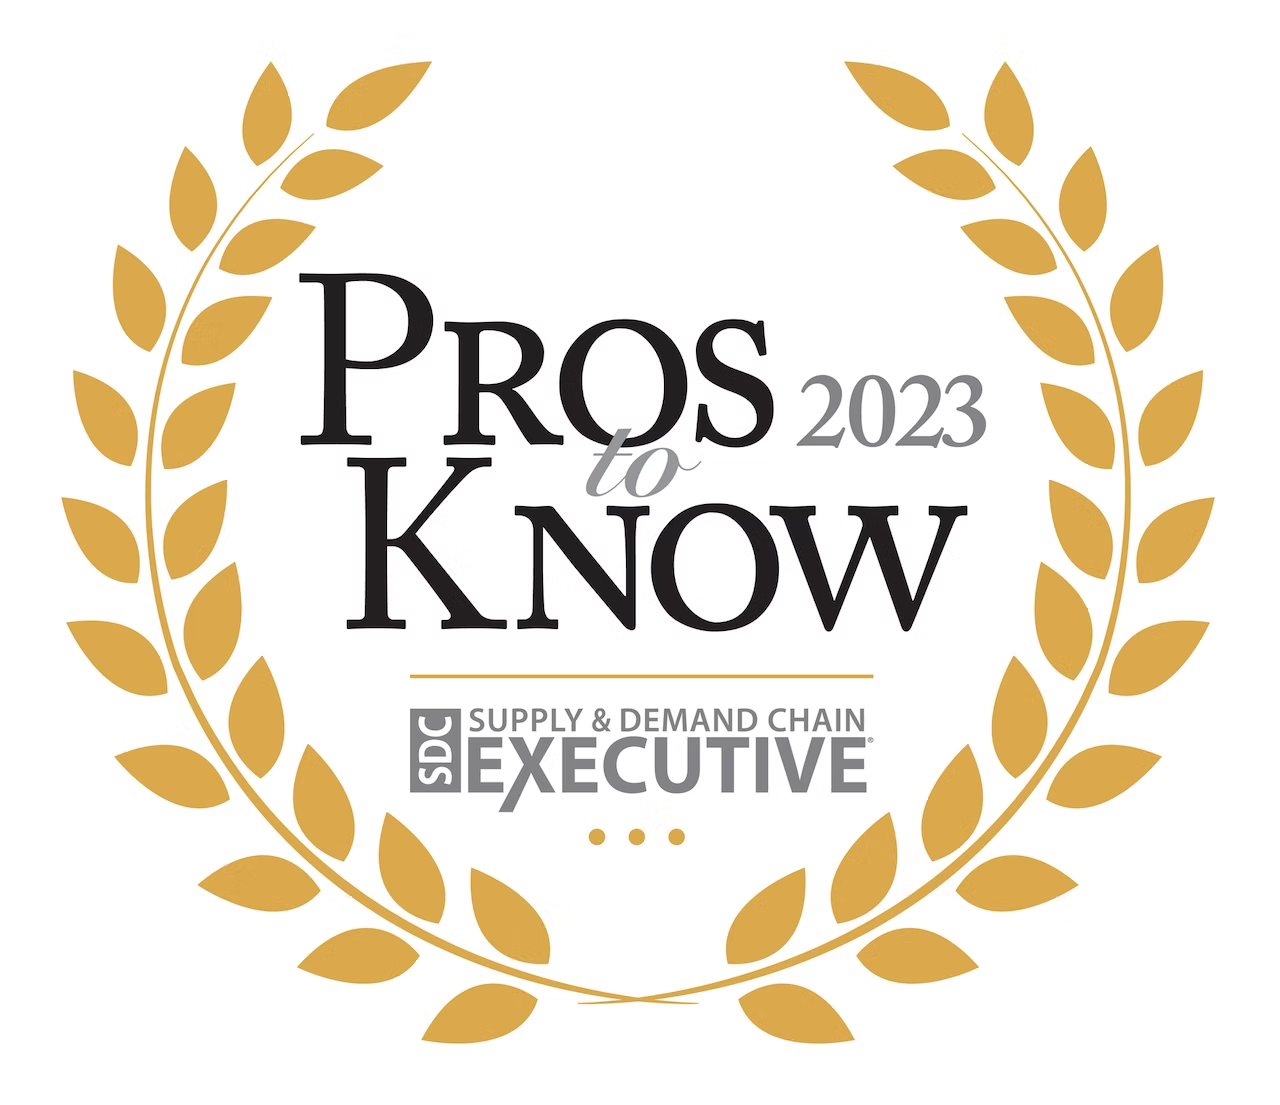 Supply & Demand Chain Executive's 2023 Pros to Know Award